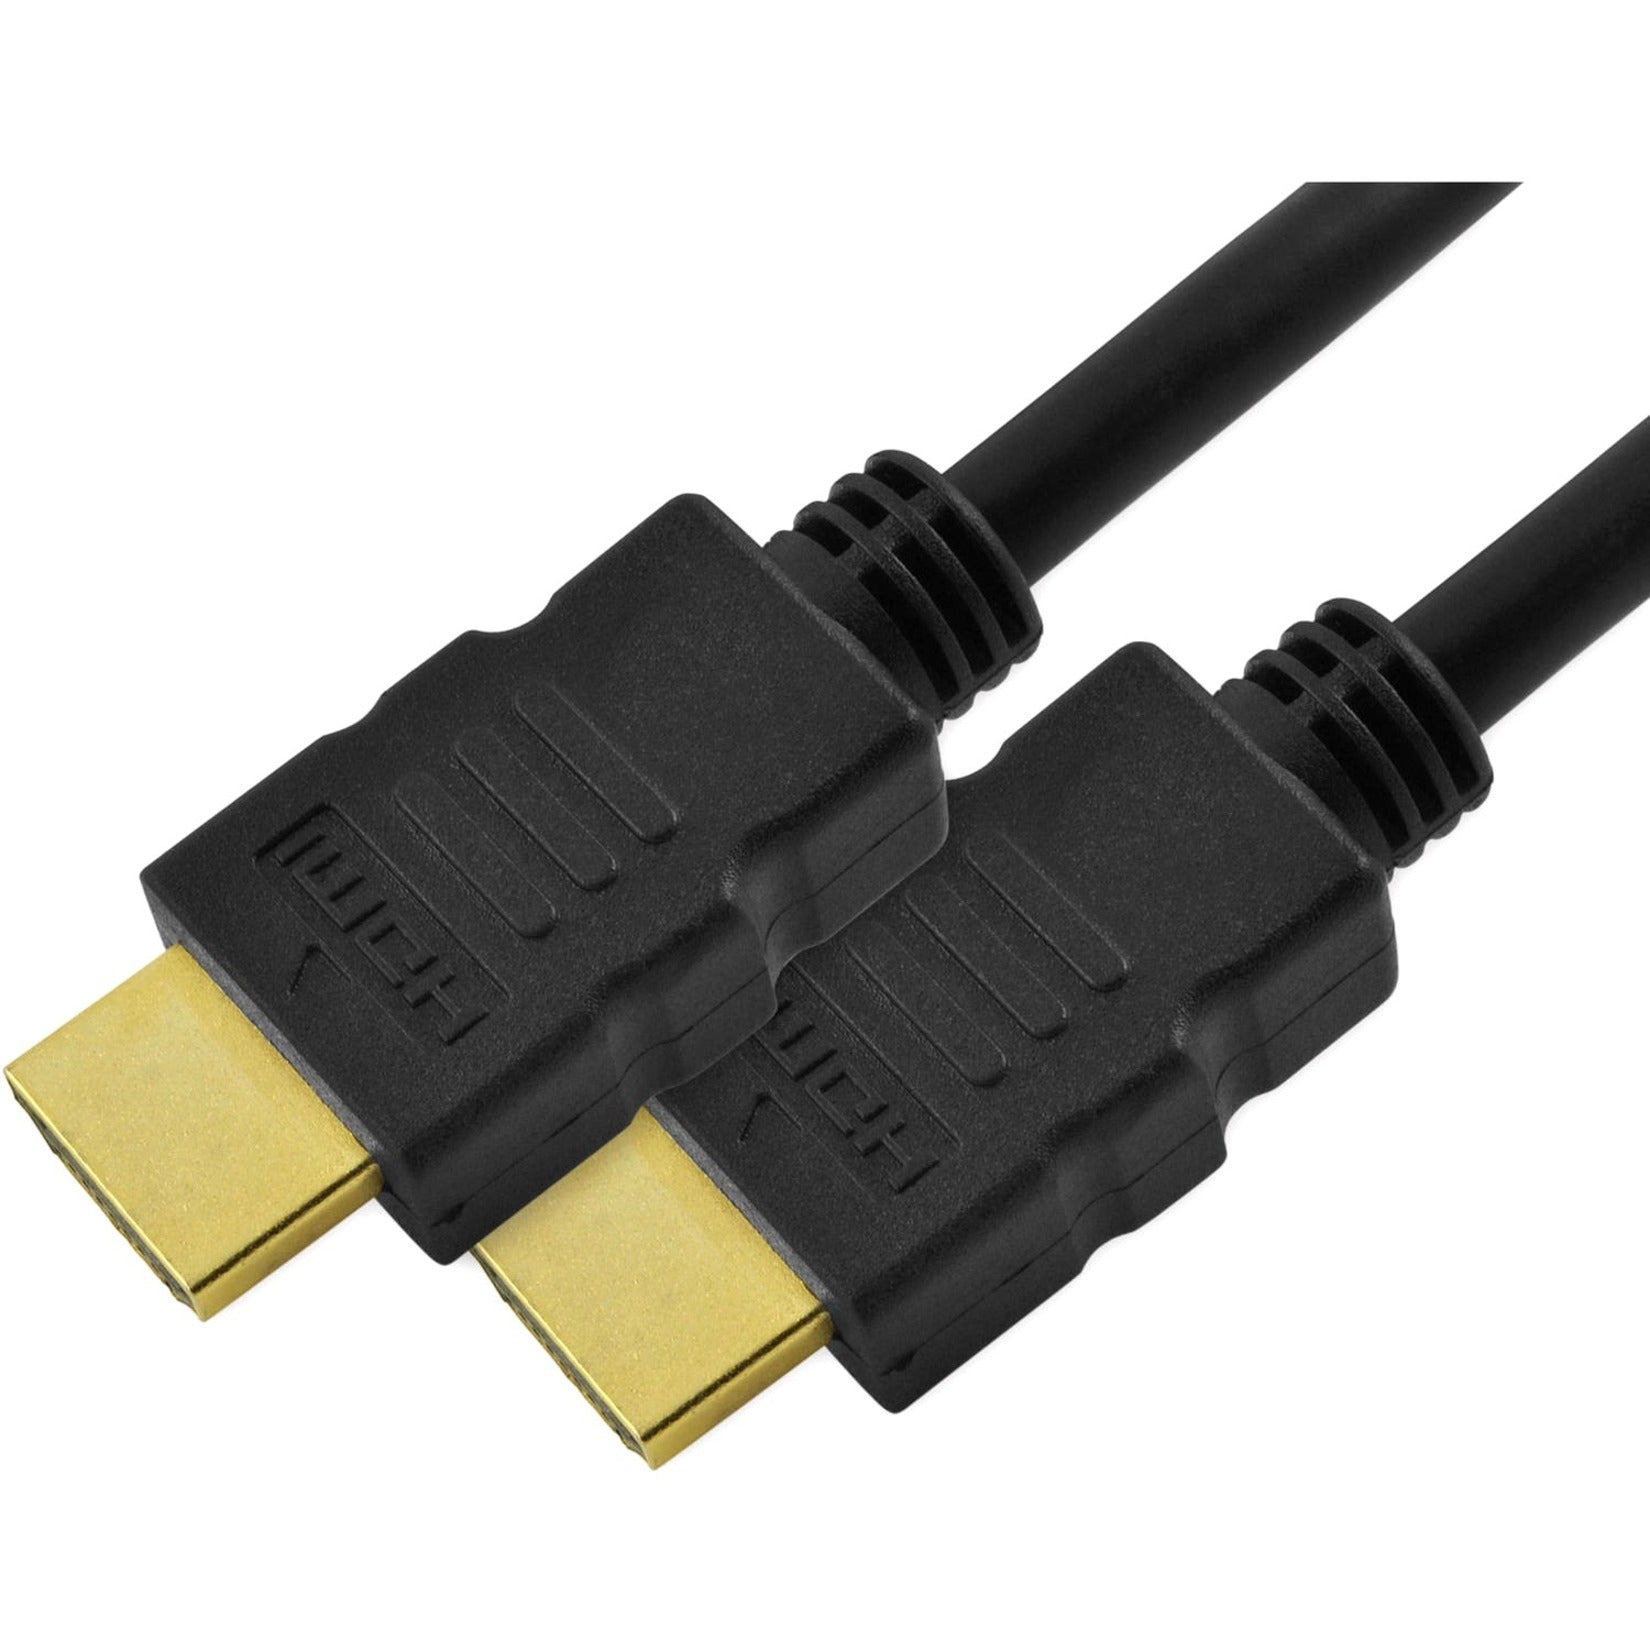 4XEM 4XHDMI4K2KPRO15 15ft Ultra High Speed 4K2K HDMI Cable, EMI/RF Protection, Gold-plated Connectors, Black